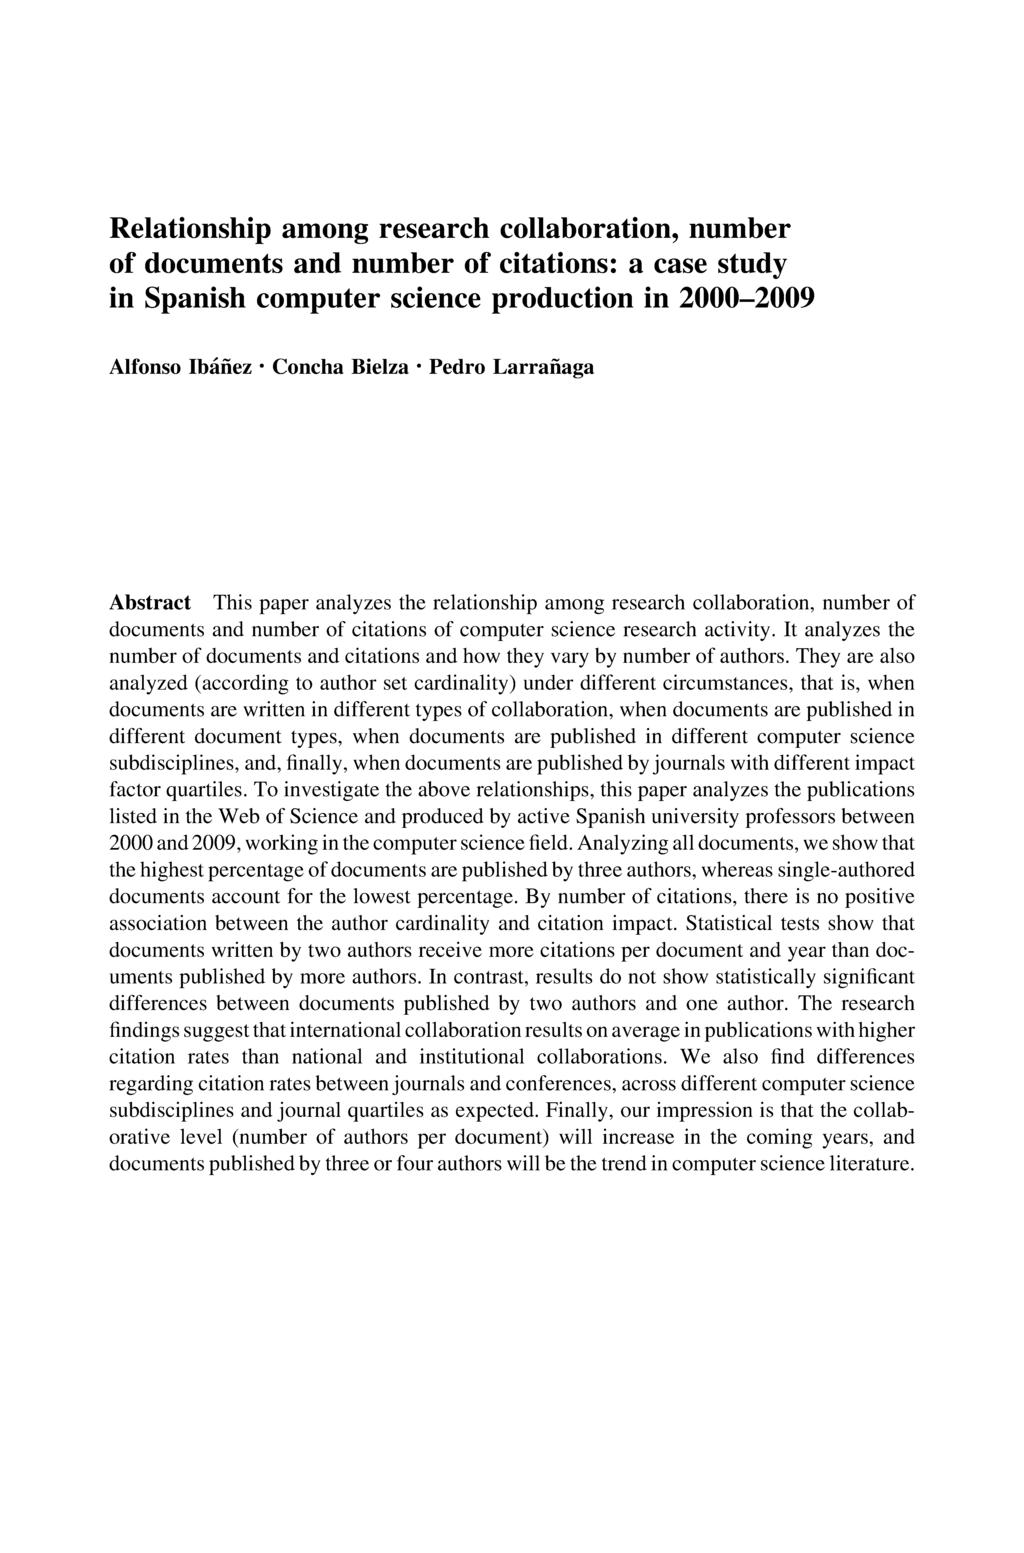 Relationship among research collaboration, number of documents and number of citations: a case study in Spanish computer science production in 2000-2009 Alfonso Ibanez Concha Bielza Pedro Larranaga